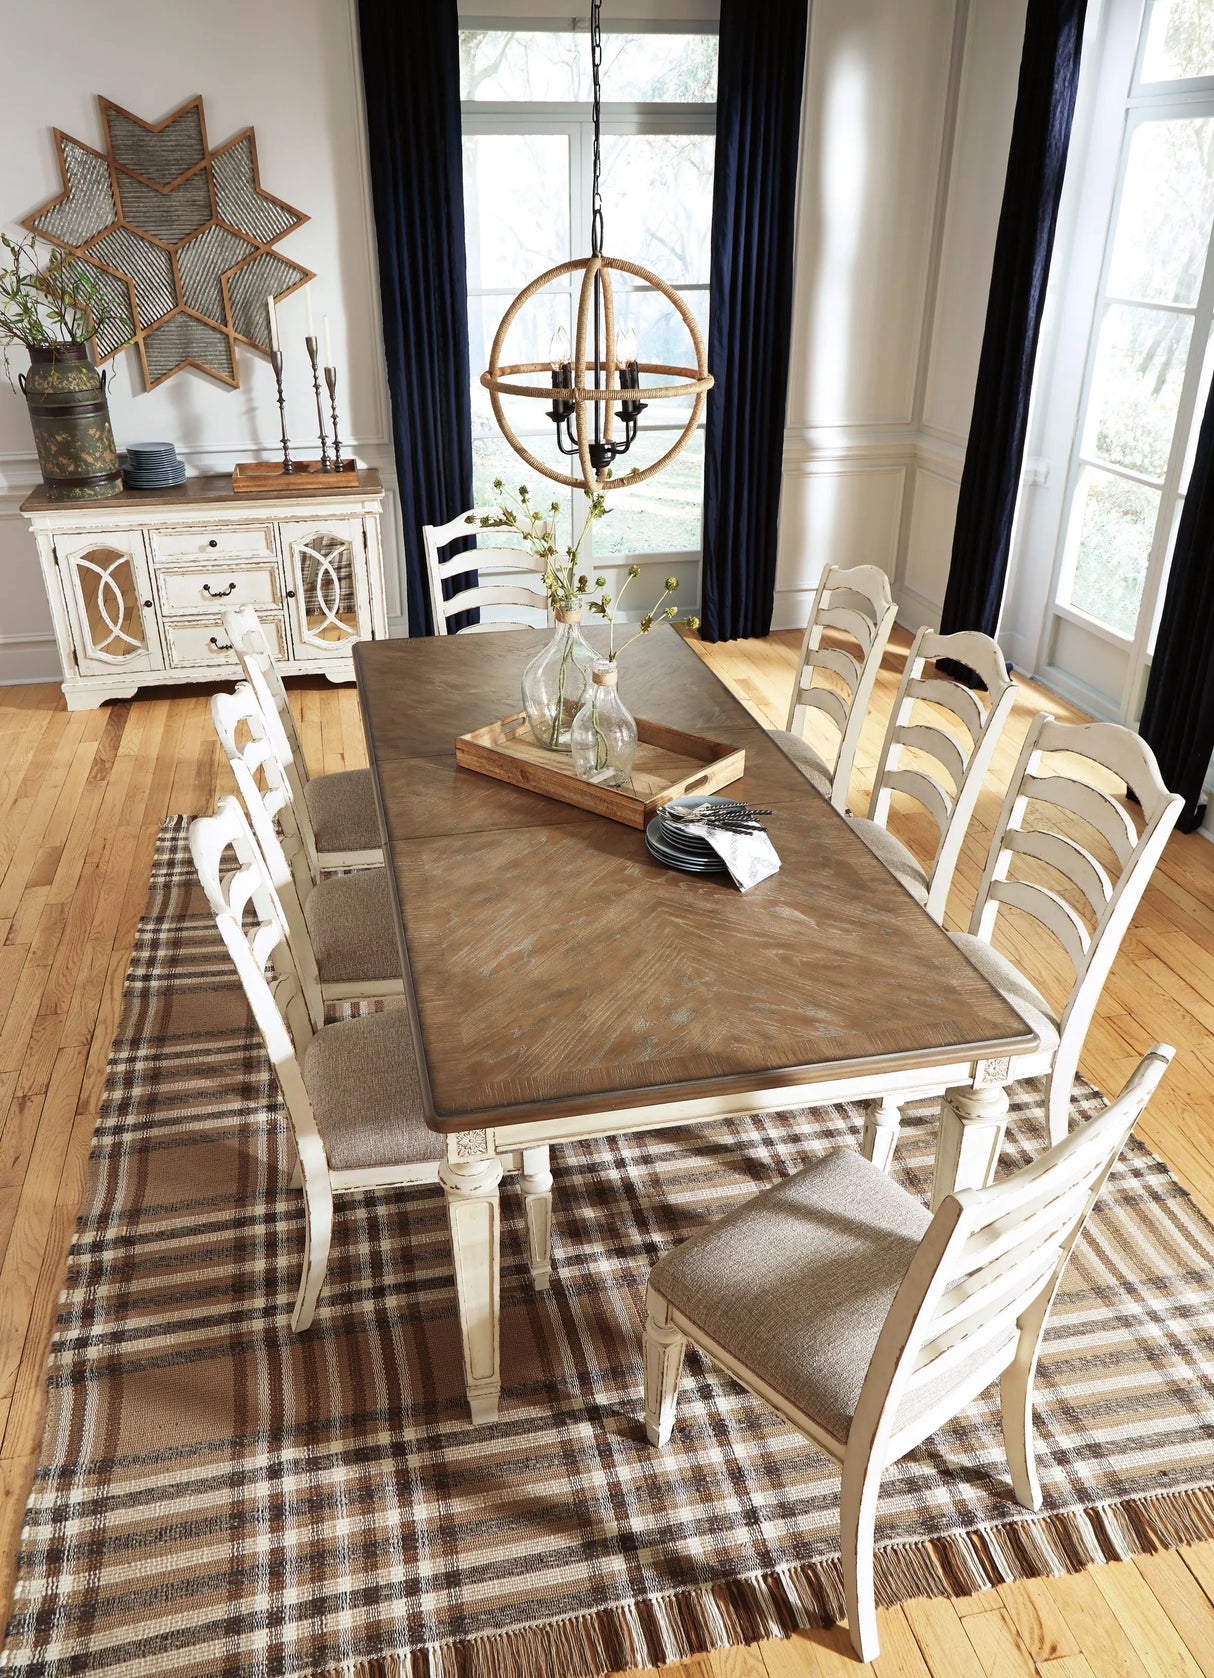 Signature Design by Ashley Realyn French Country Dining Extension Table, Seats up to 8, Chipped White Ashley Furniture